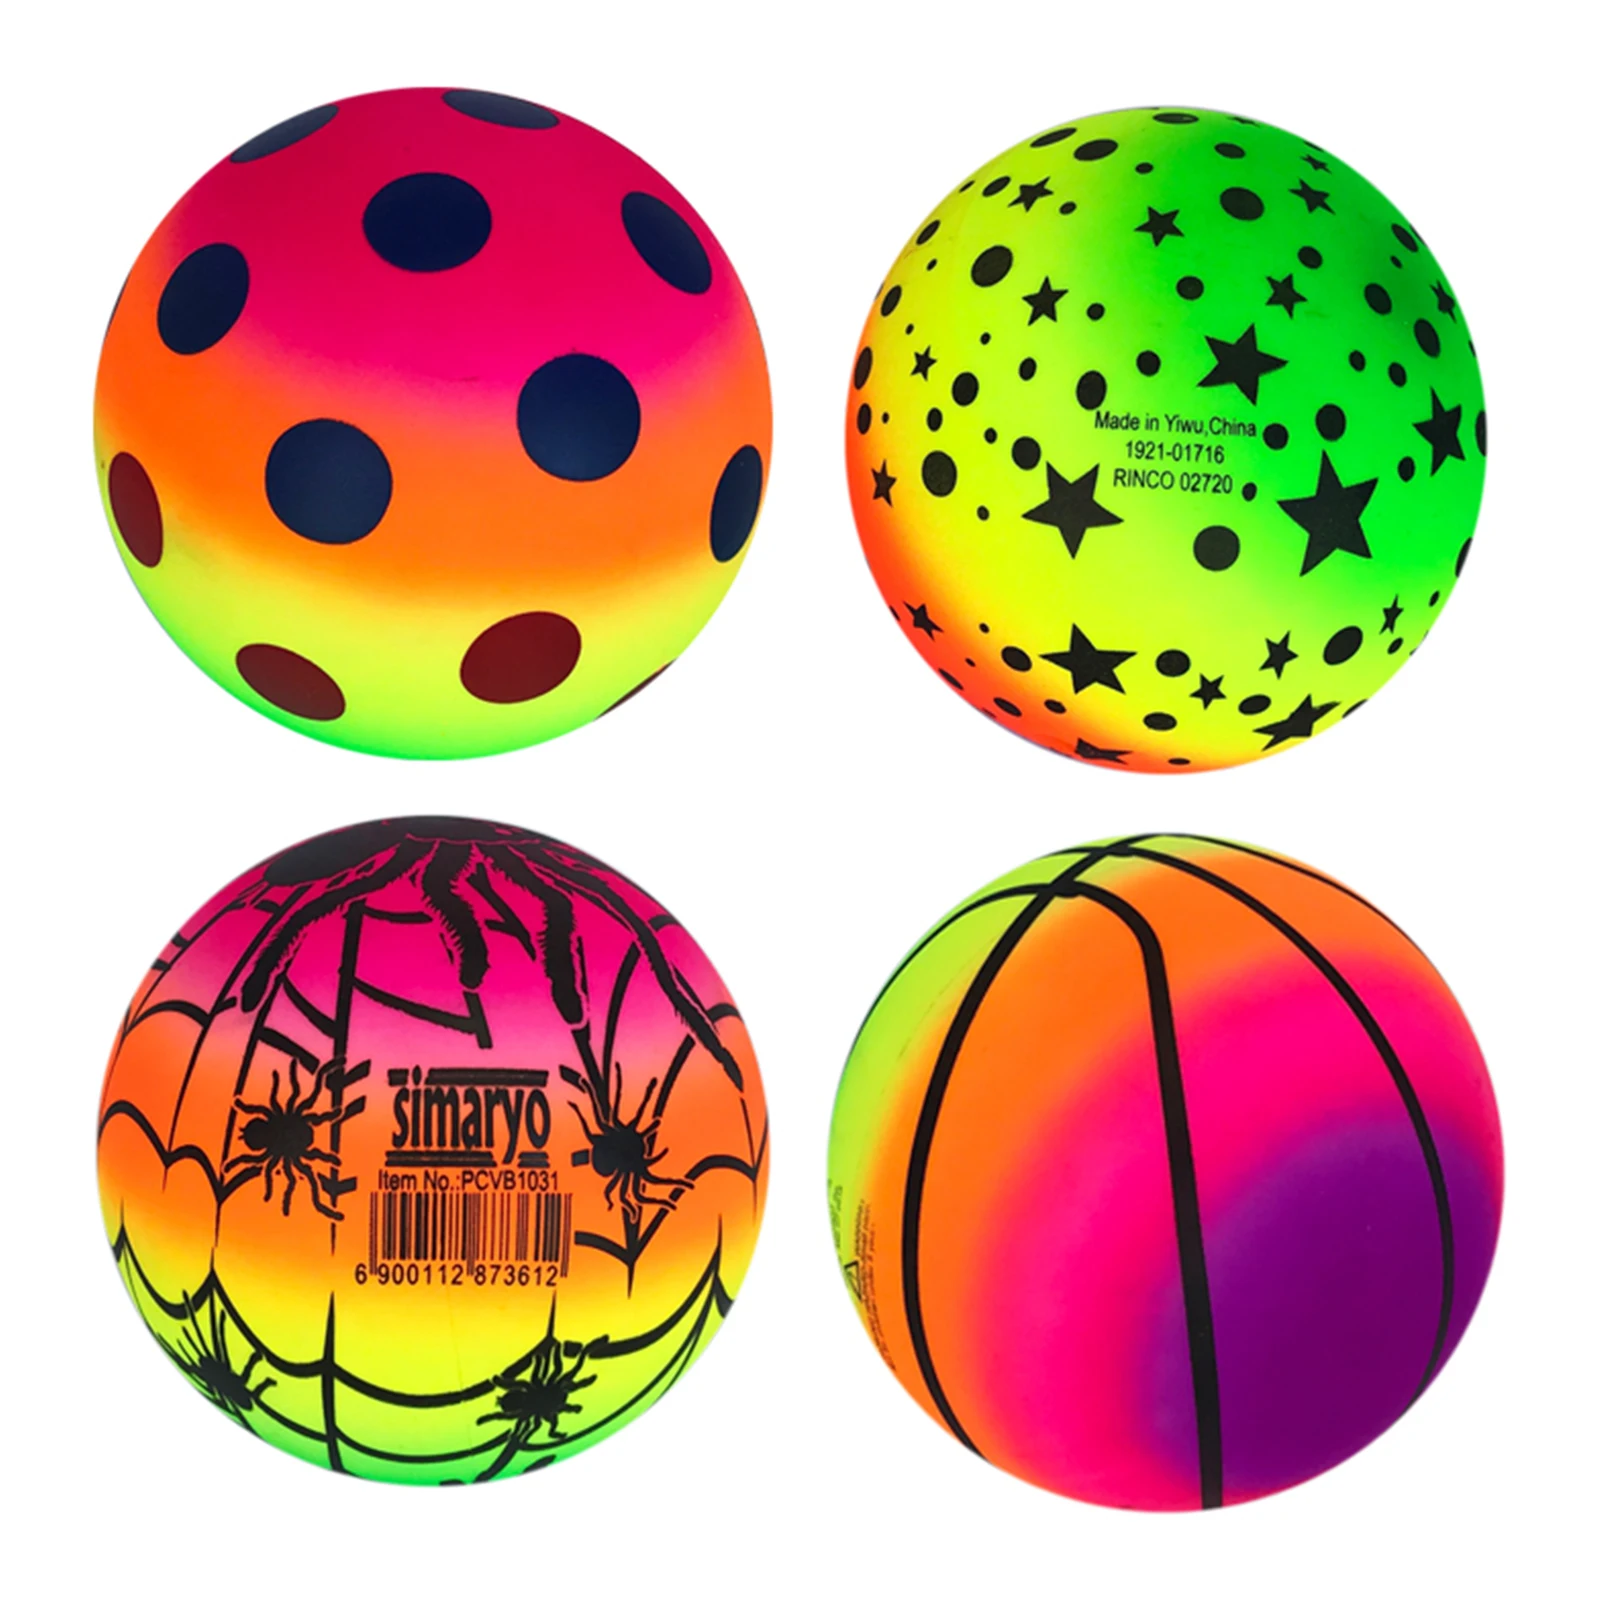 

6 Inch Playground Ball Colorful Inflatable Beach Balls Rainbow PVC Sports Kickball For Kids Handball For Indoor And Outdoor